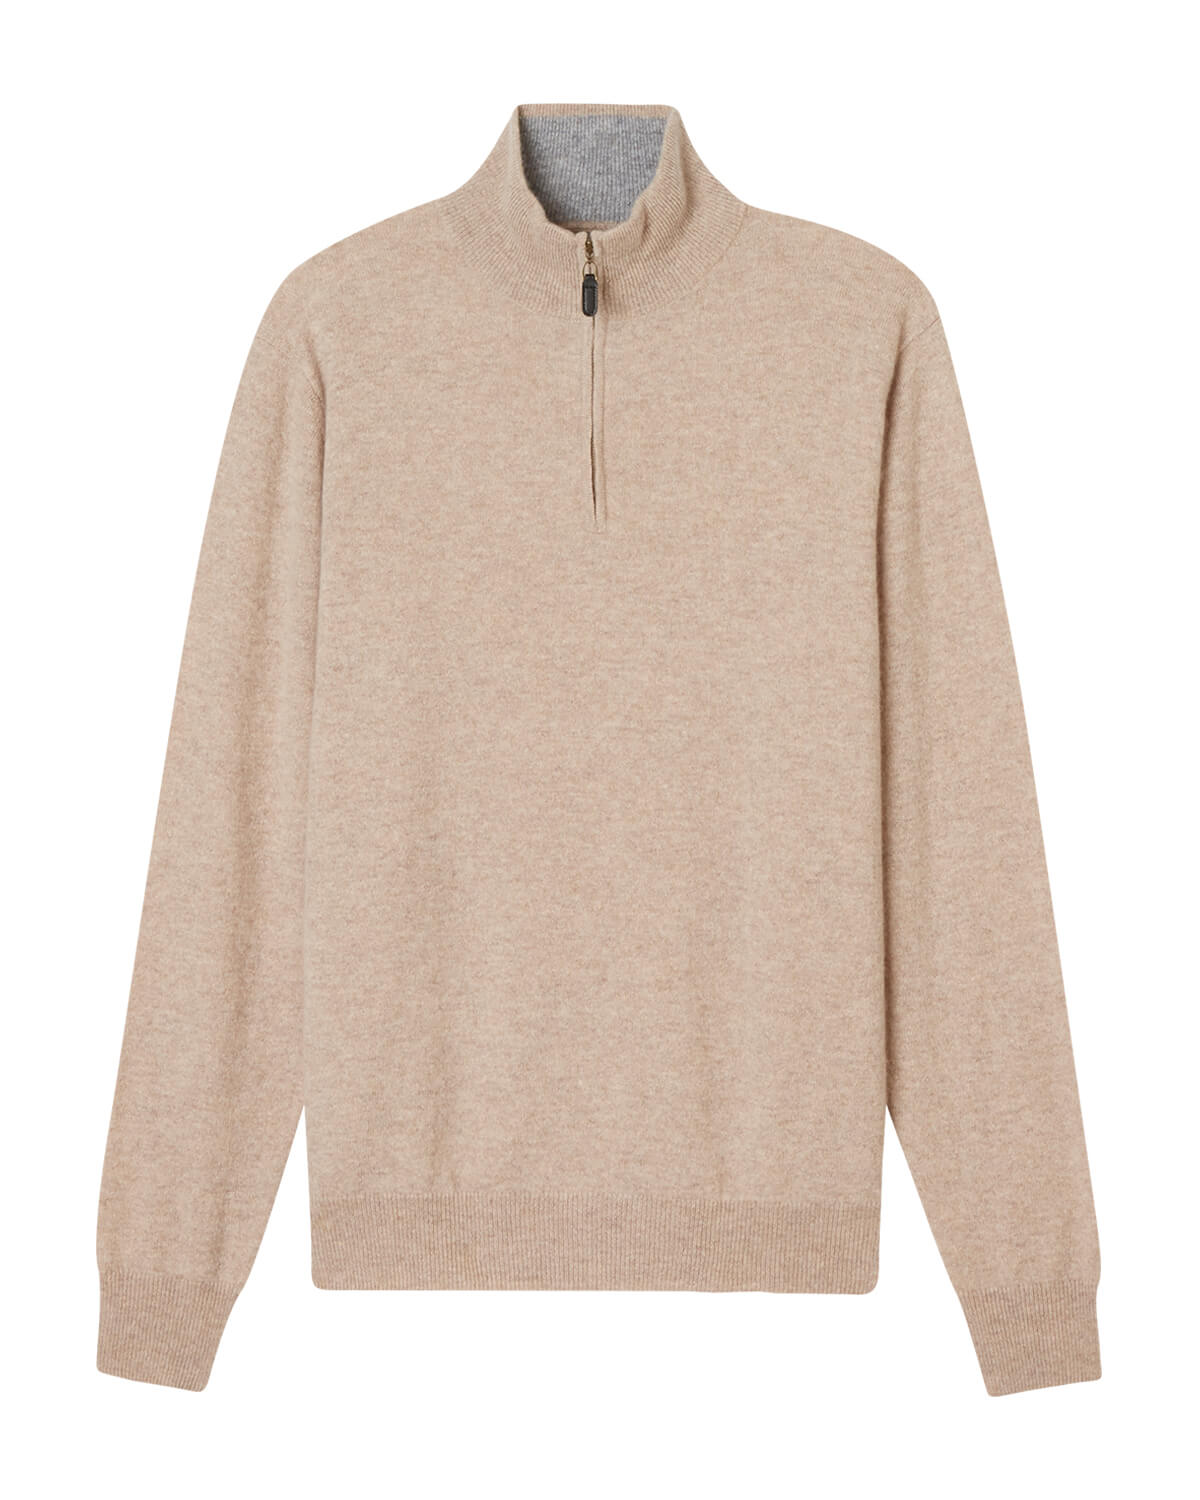 Akira Recycled Cashmere Blend Sweater